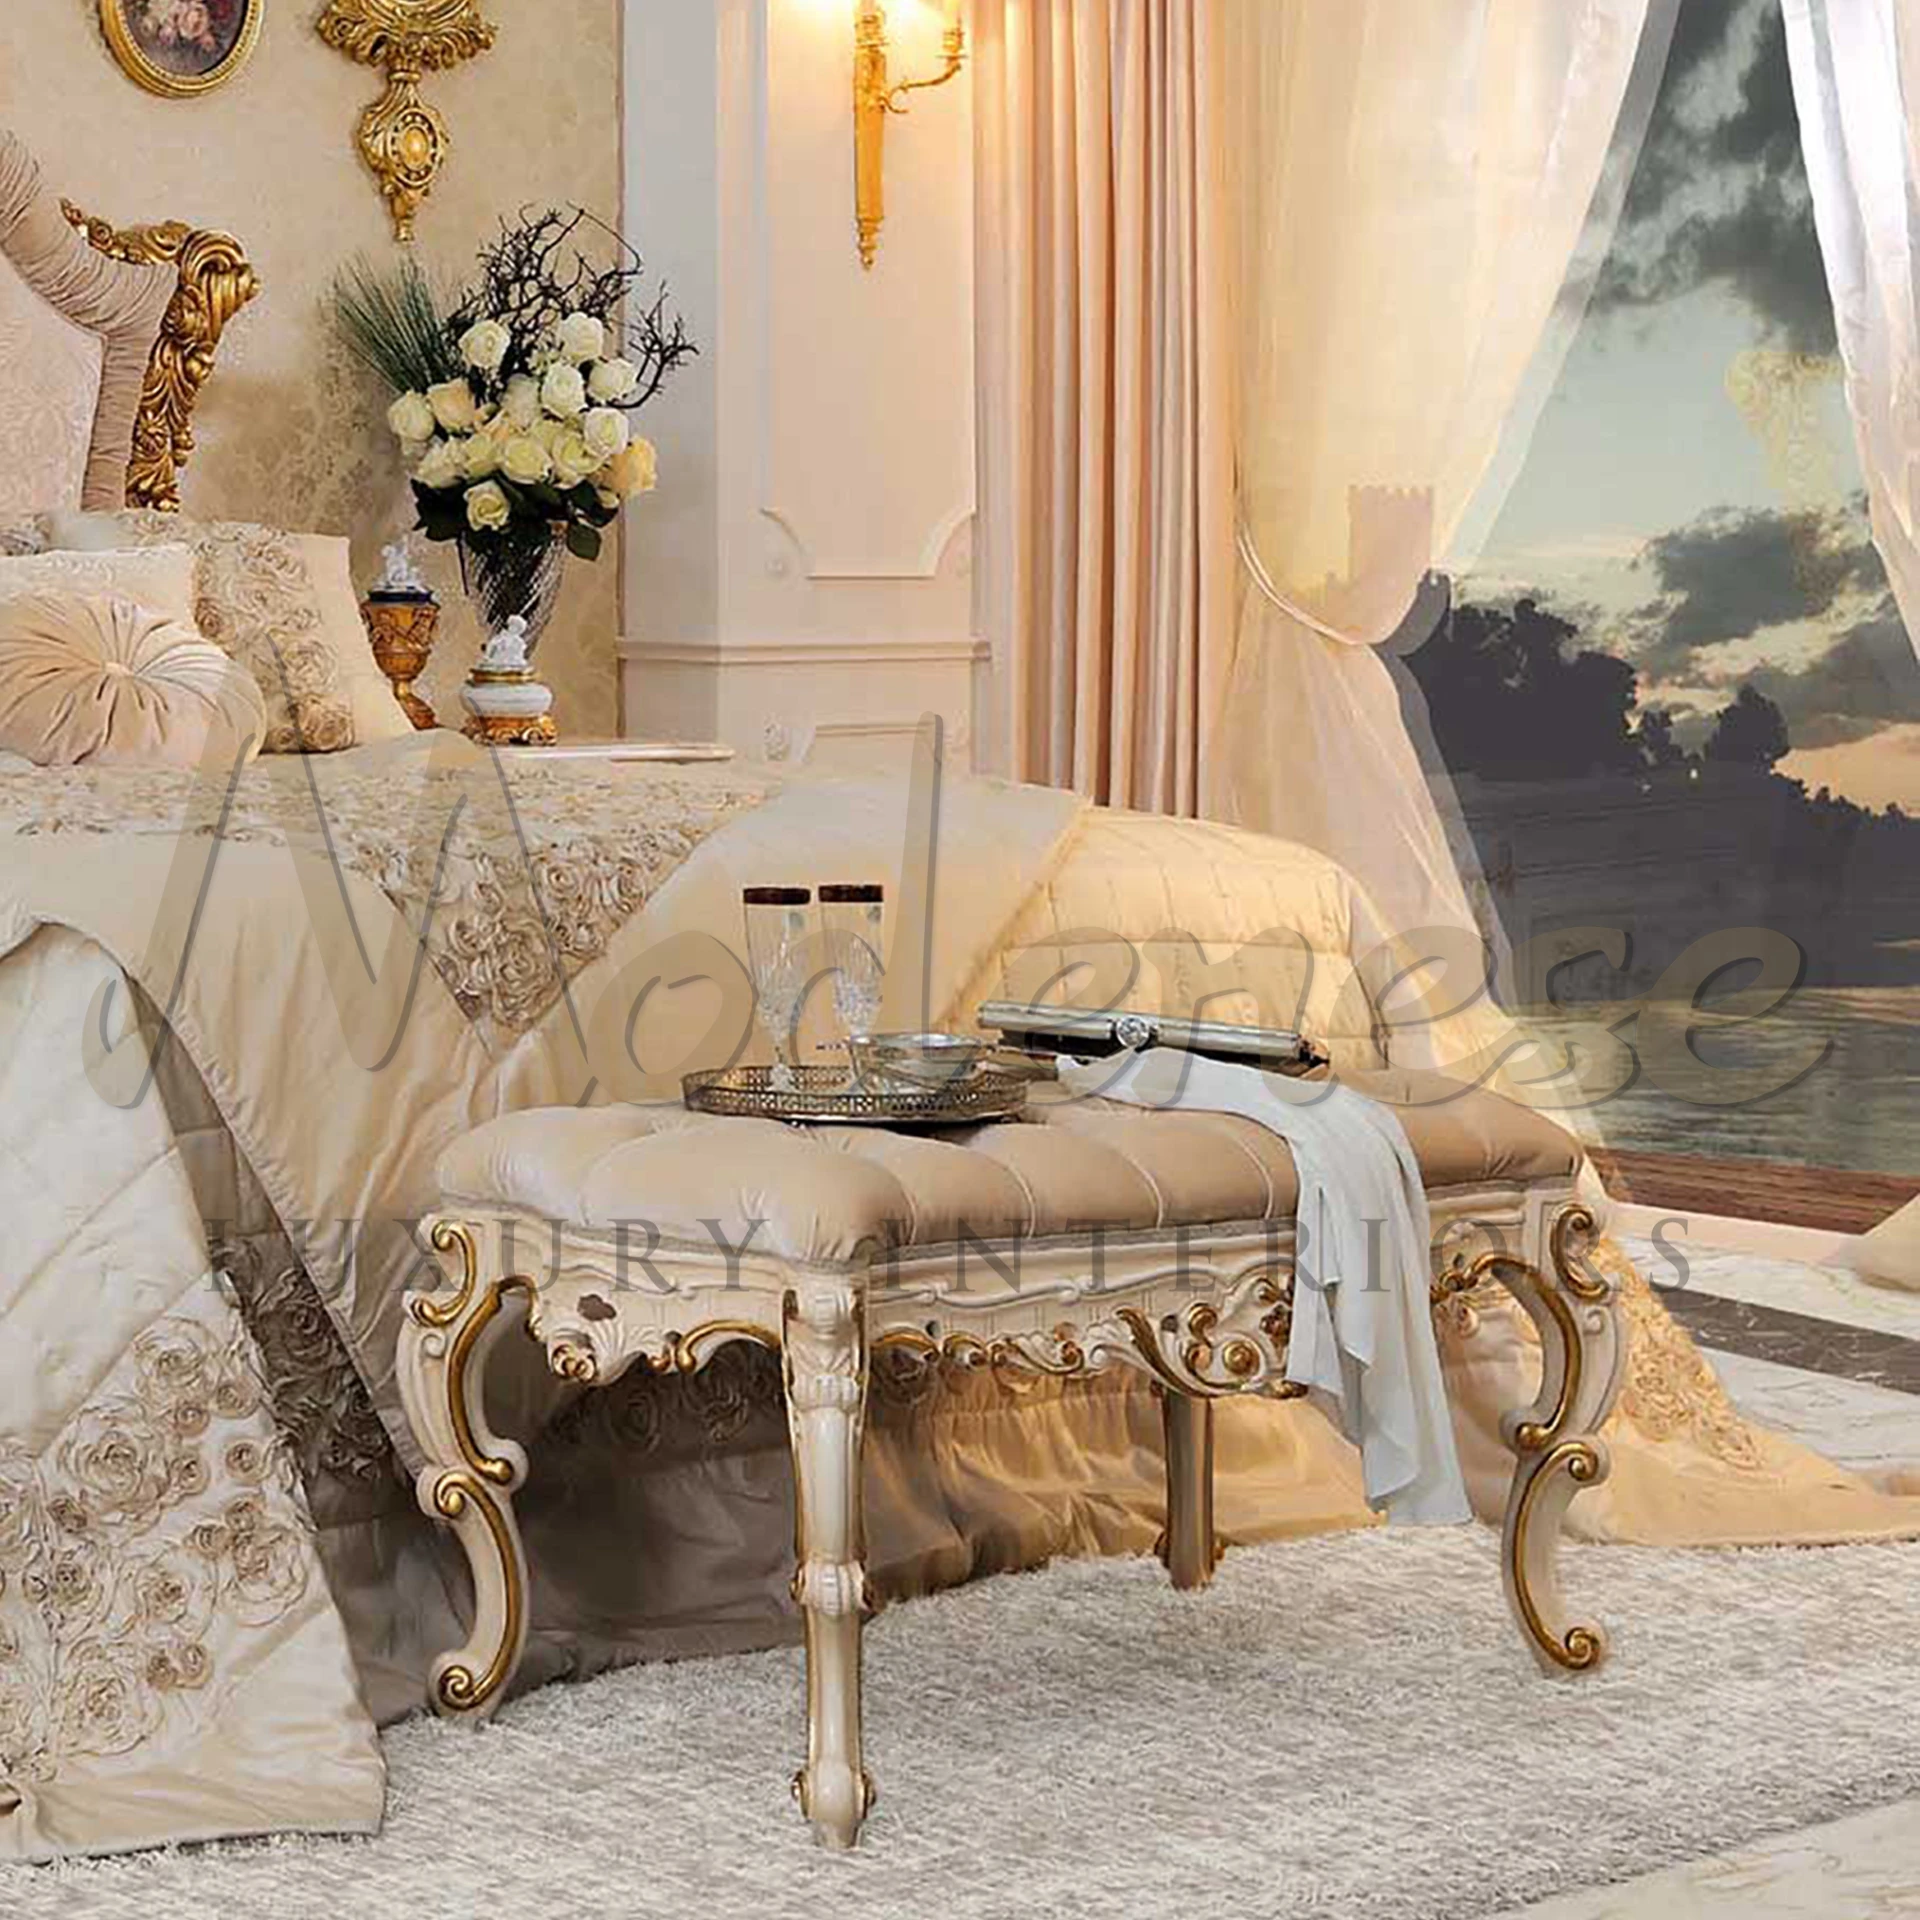 Luxurious tufted bench with rococo gold detailing and a white throw.                                                                                        